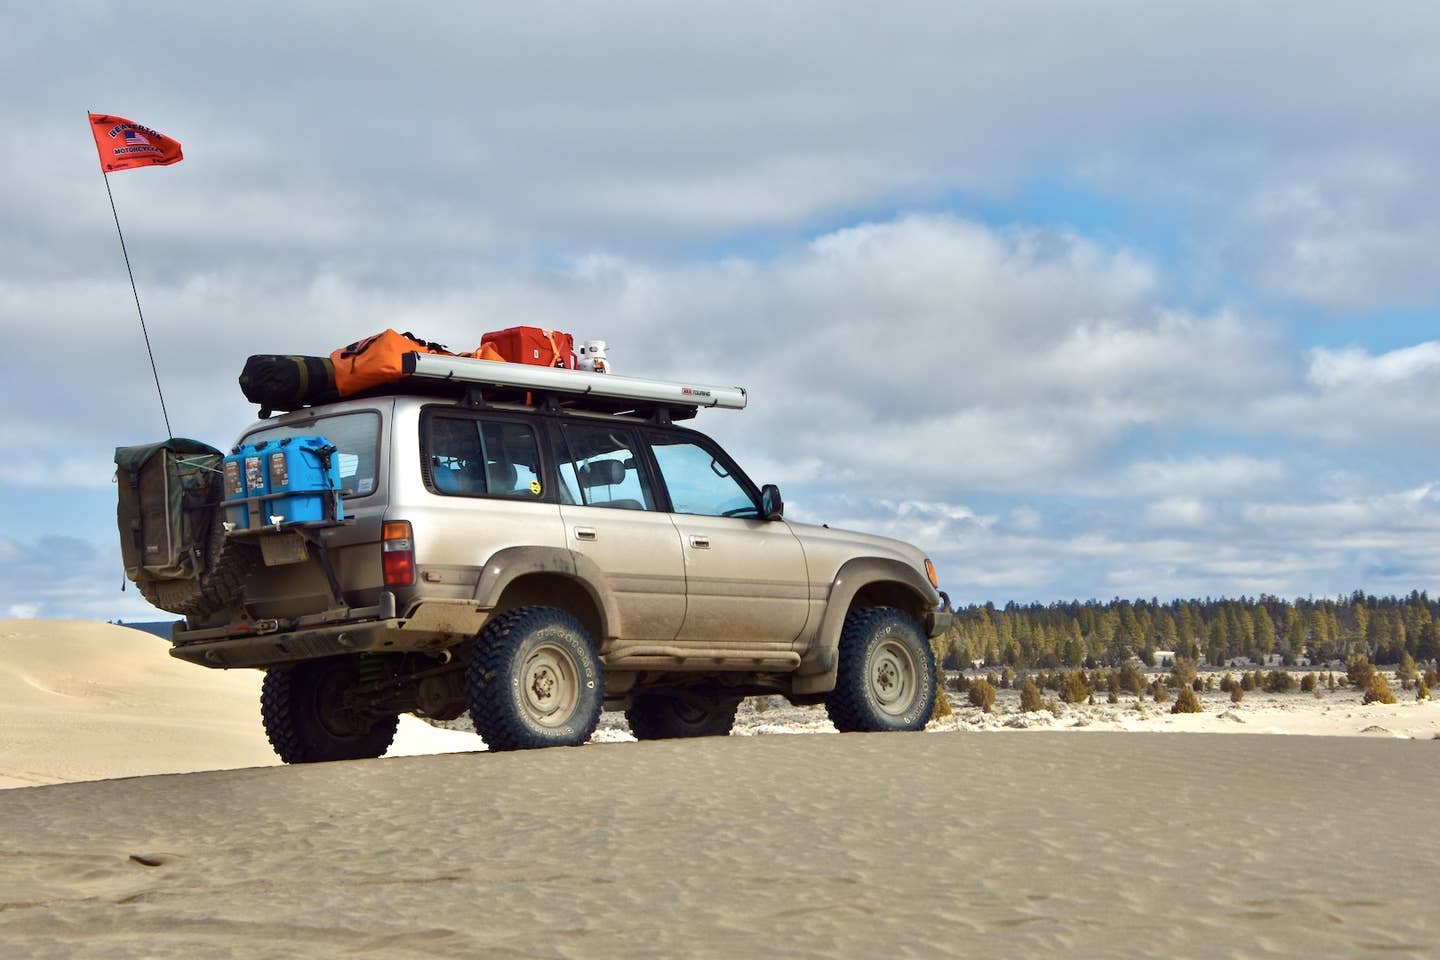 A Toyota Land Cruiser (80-series) on top of a dune in Oregon